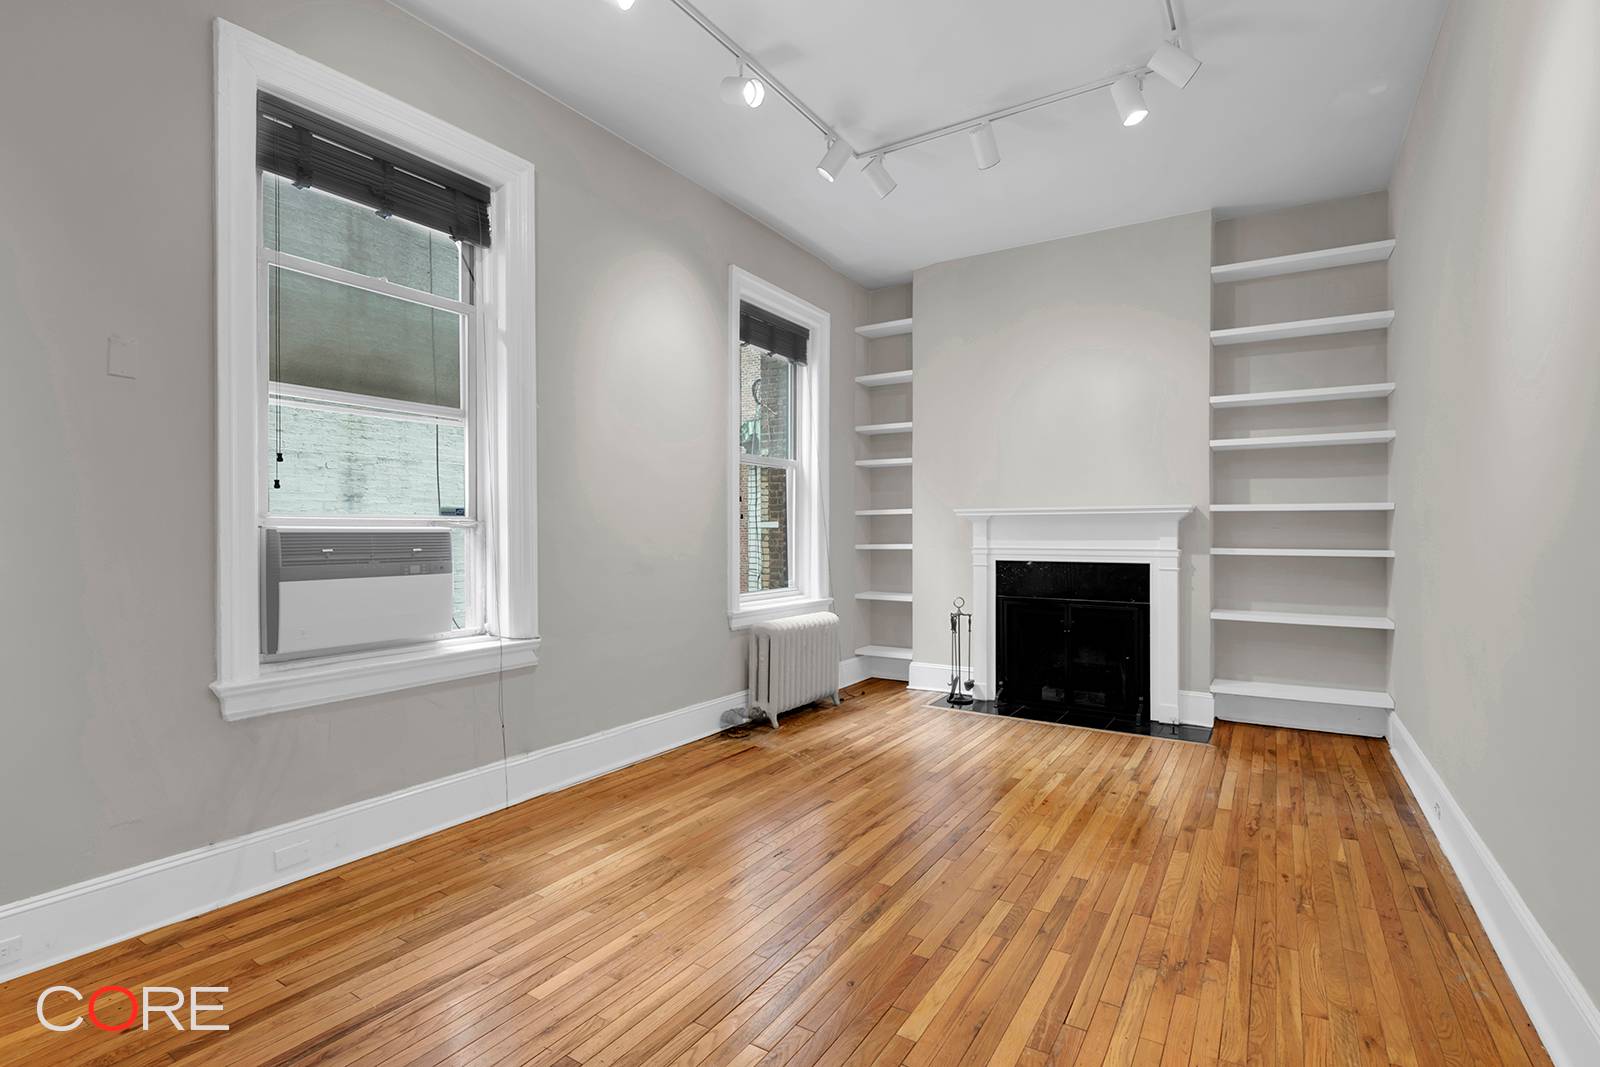 1. 5 MONTHS FREE ON A 12 MONTH LEASE Enjoy this spacious, updated loft apartment located in Midtown South's Murray Hill district in a historic townhouse.